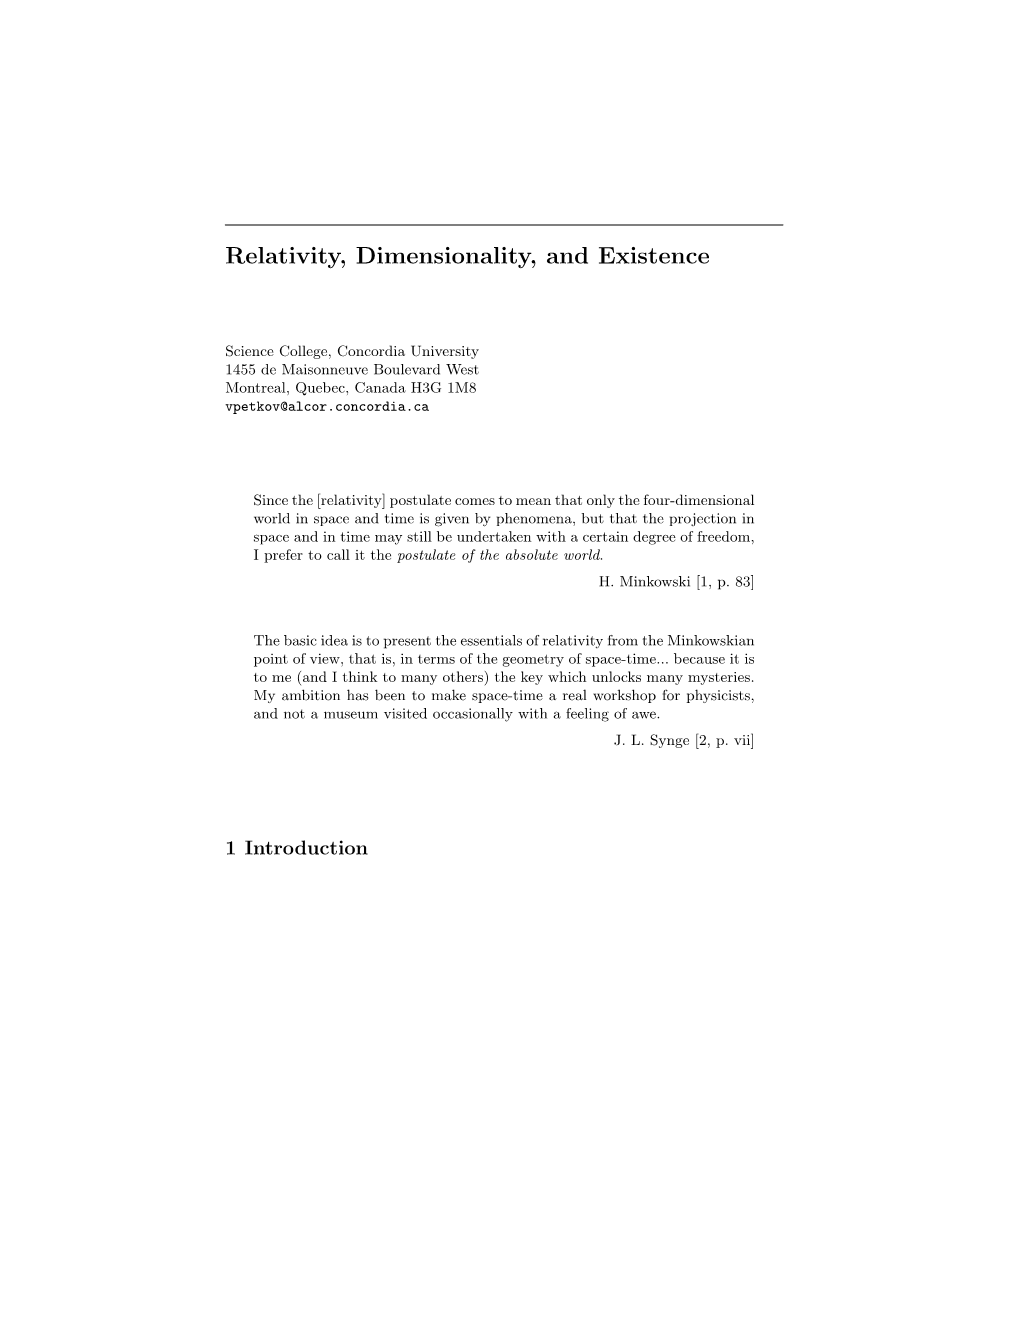 Relativity, Dimensionality, and Existence